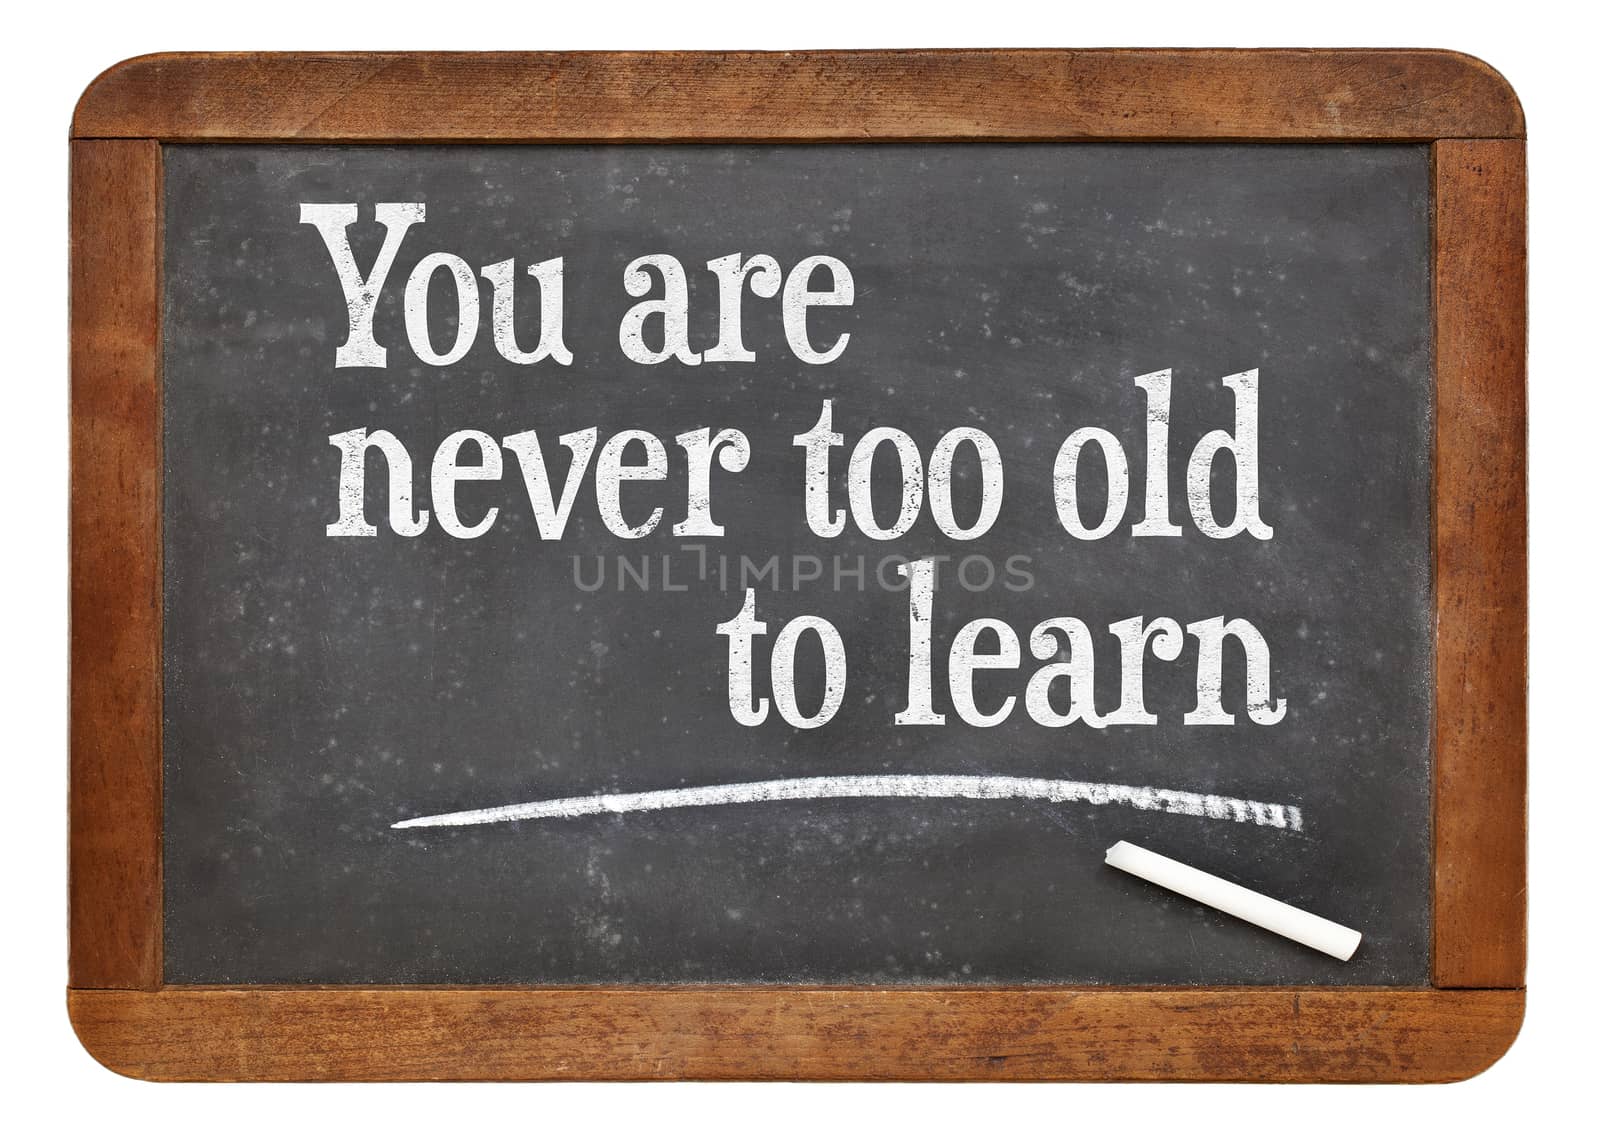 You are never too old too learn - motivational words  on a vintage slate blackboard -continuous education concept